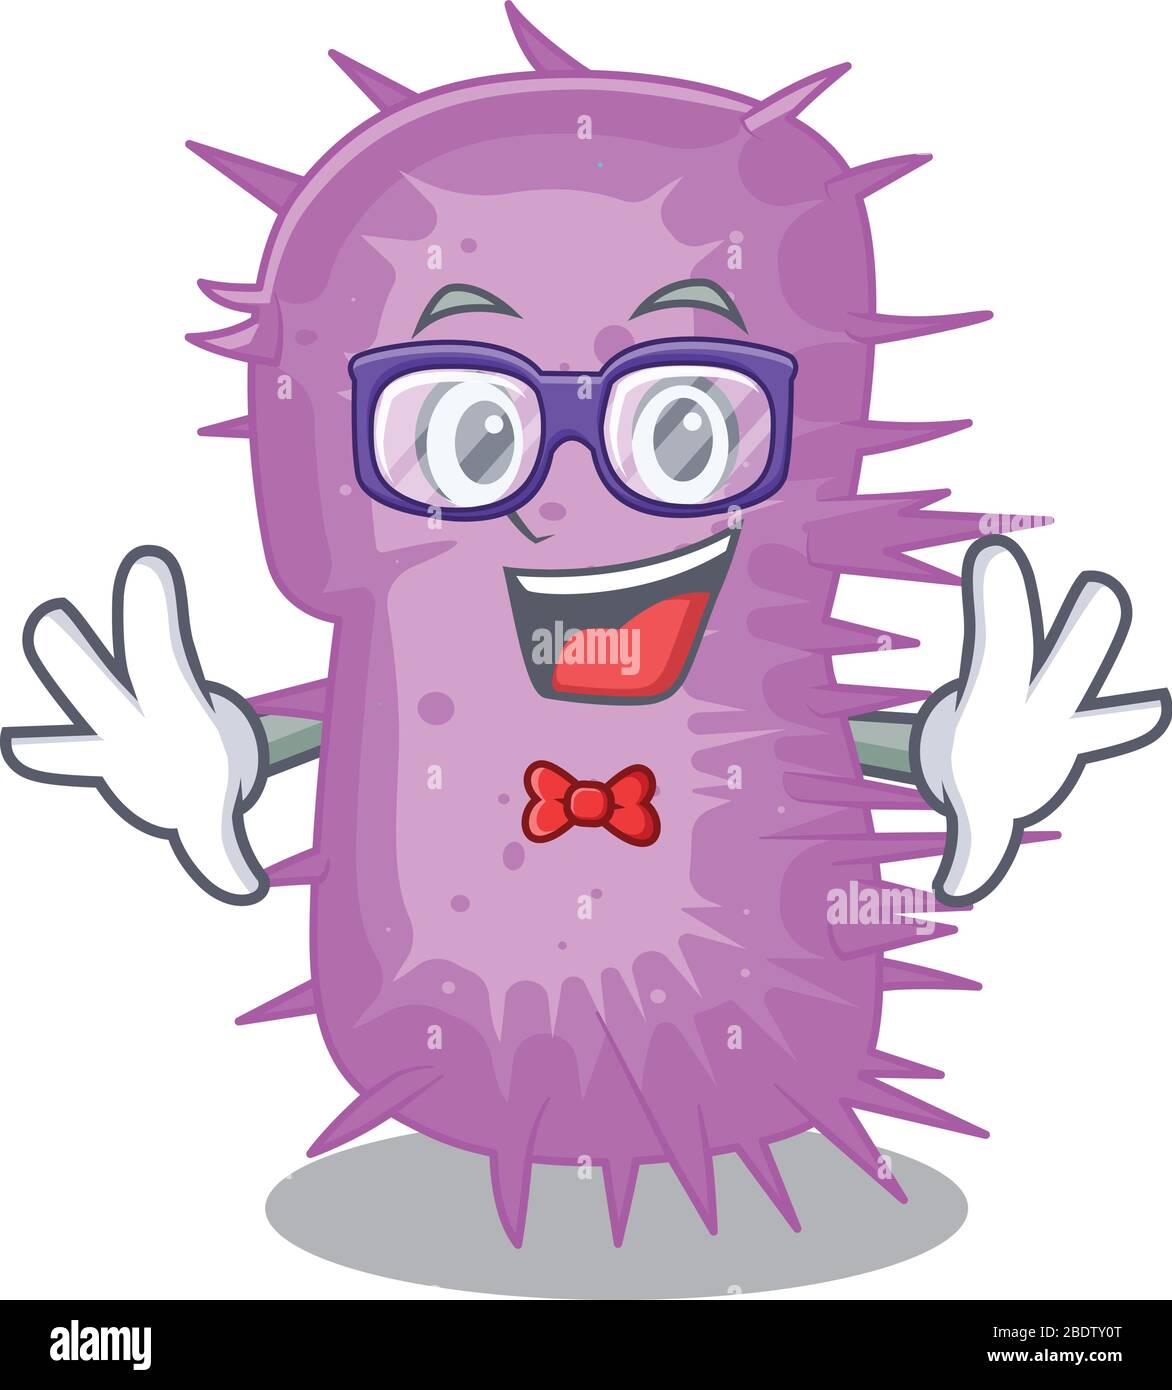 Mascot design style of geek acinetobacter baumannii with glasses Stock Vector